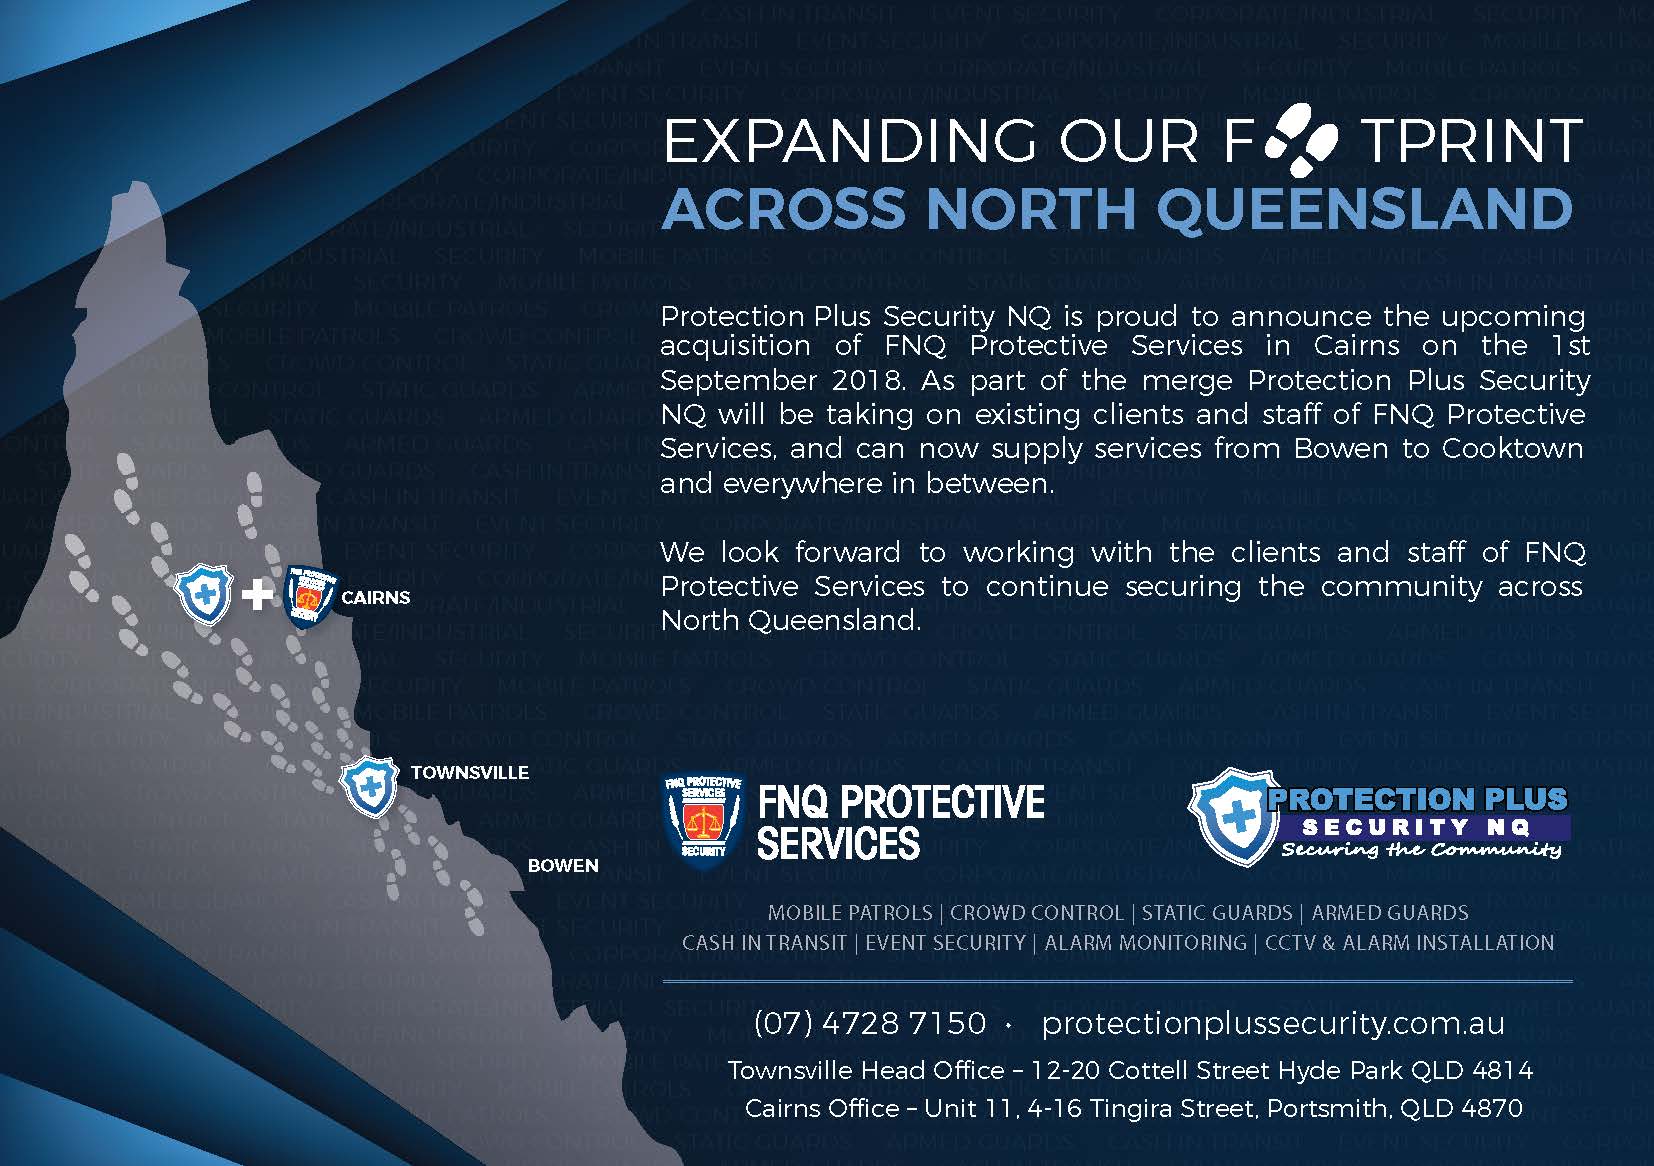 Protection Plus Security NQ is proud to announce the upcoming acquisition of FNQ Protective Services Cairns